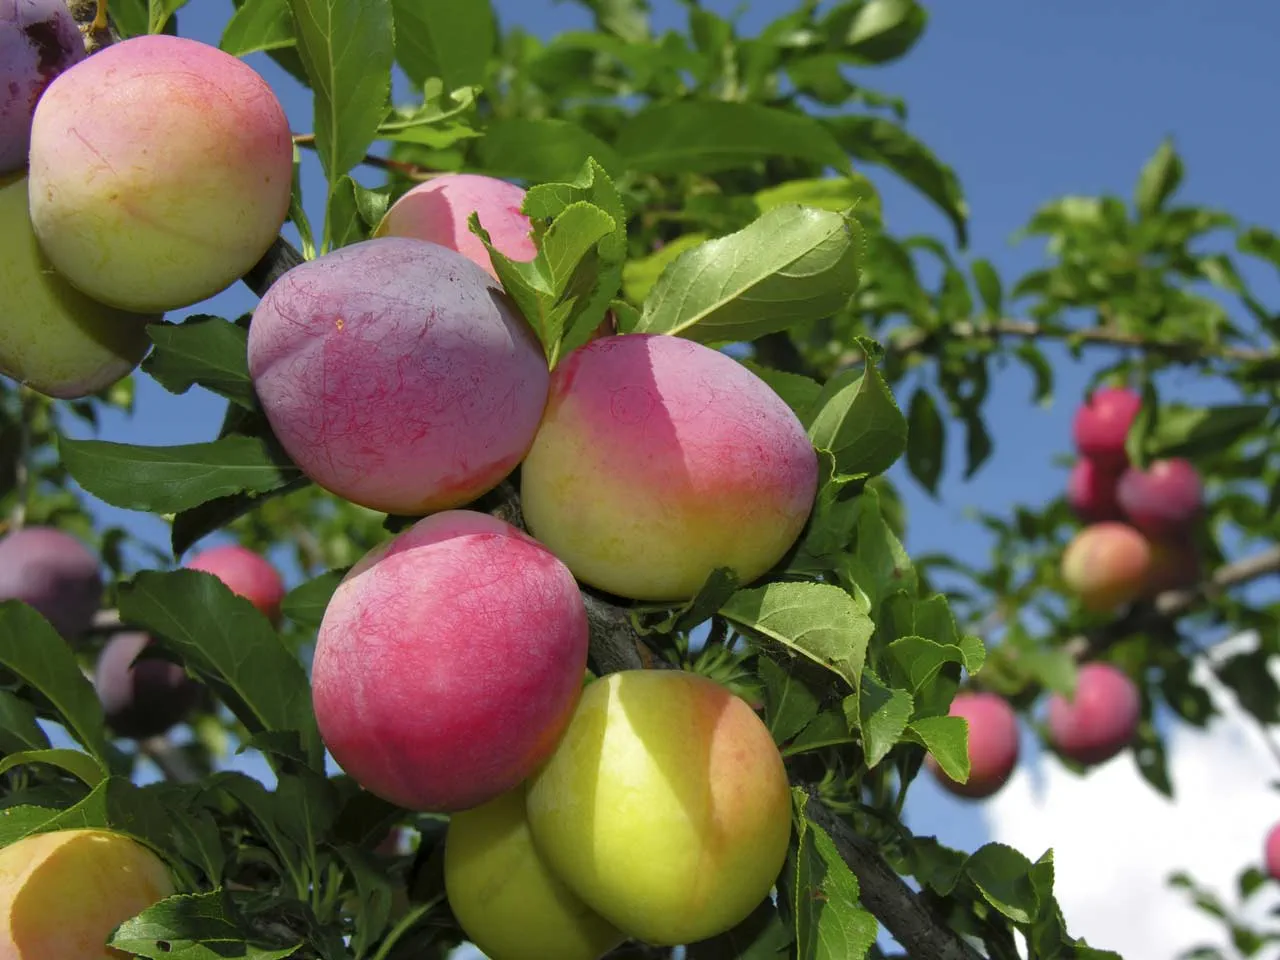 Types Of Plums To Grow In The UK